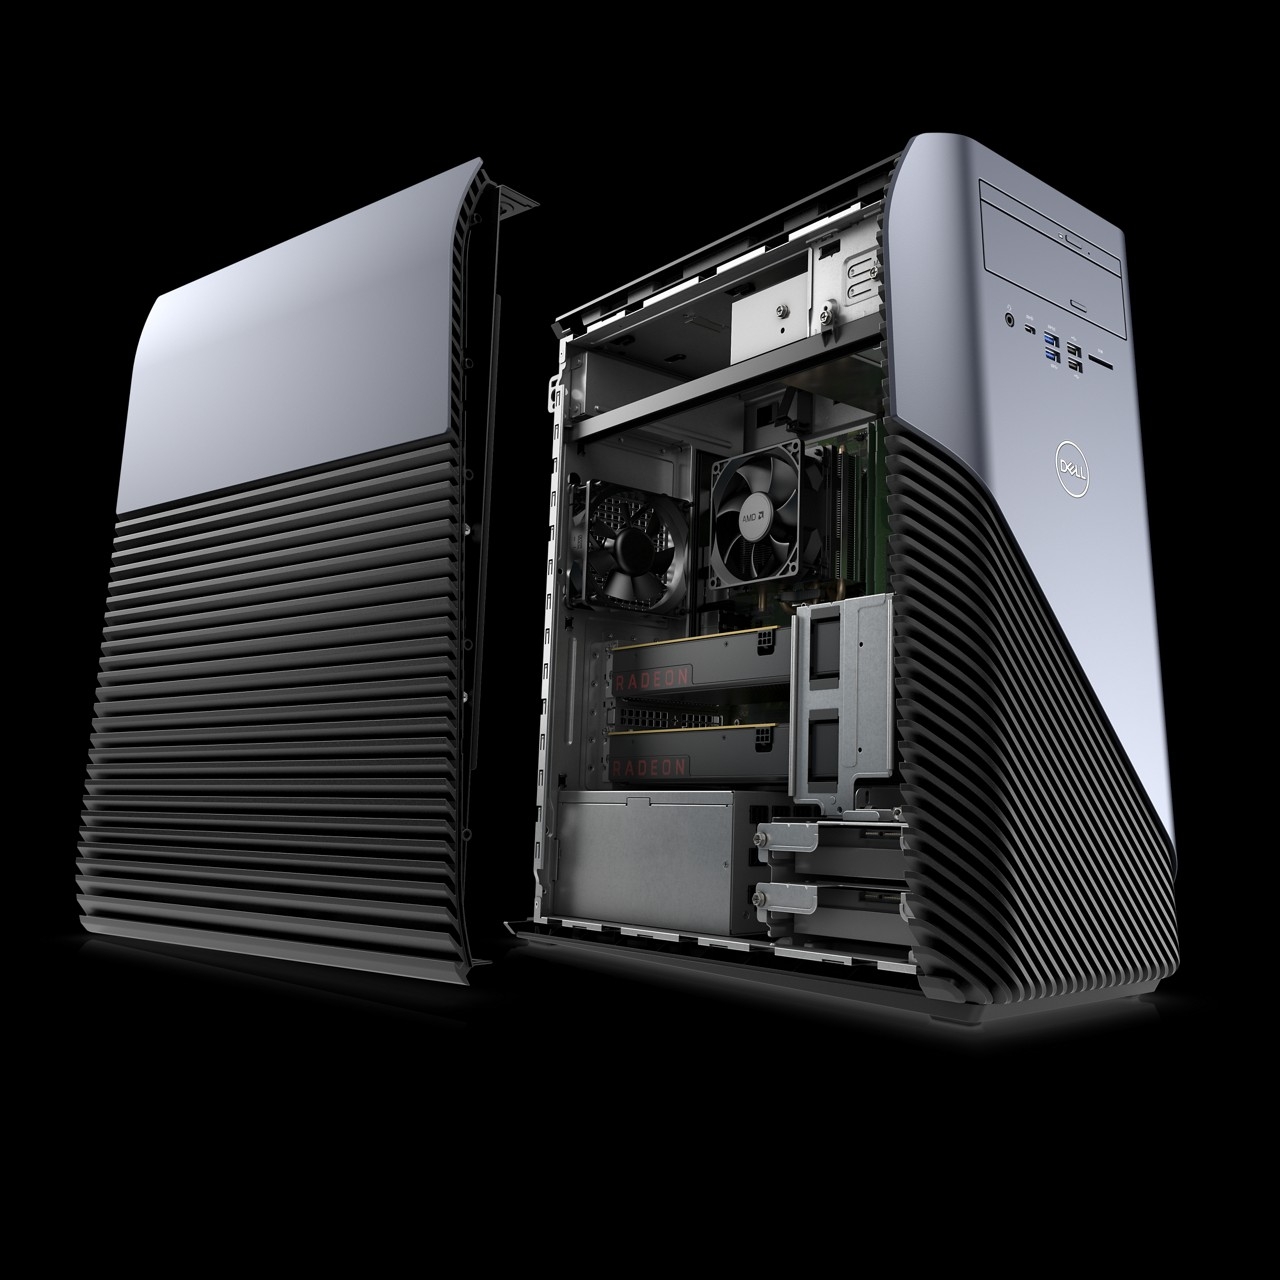 Dell introduced the first gaming desktop in its growing Inspiron Gaming line at Computex